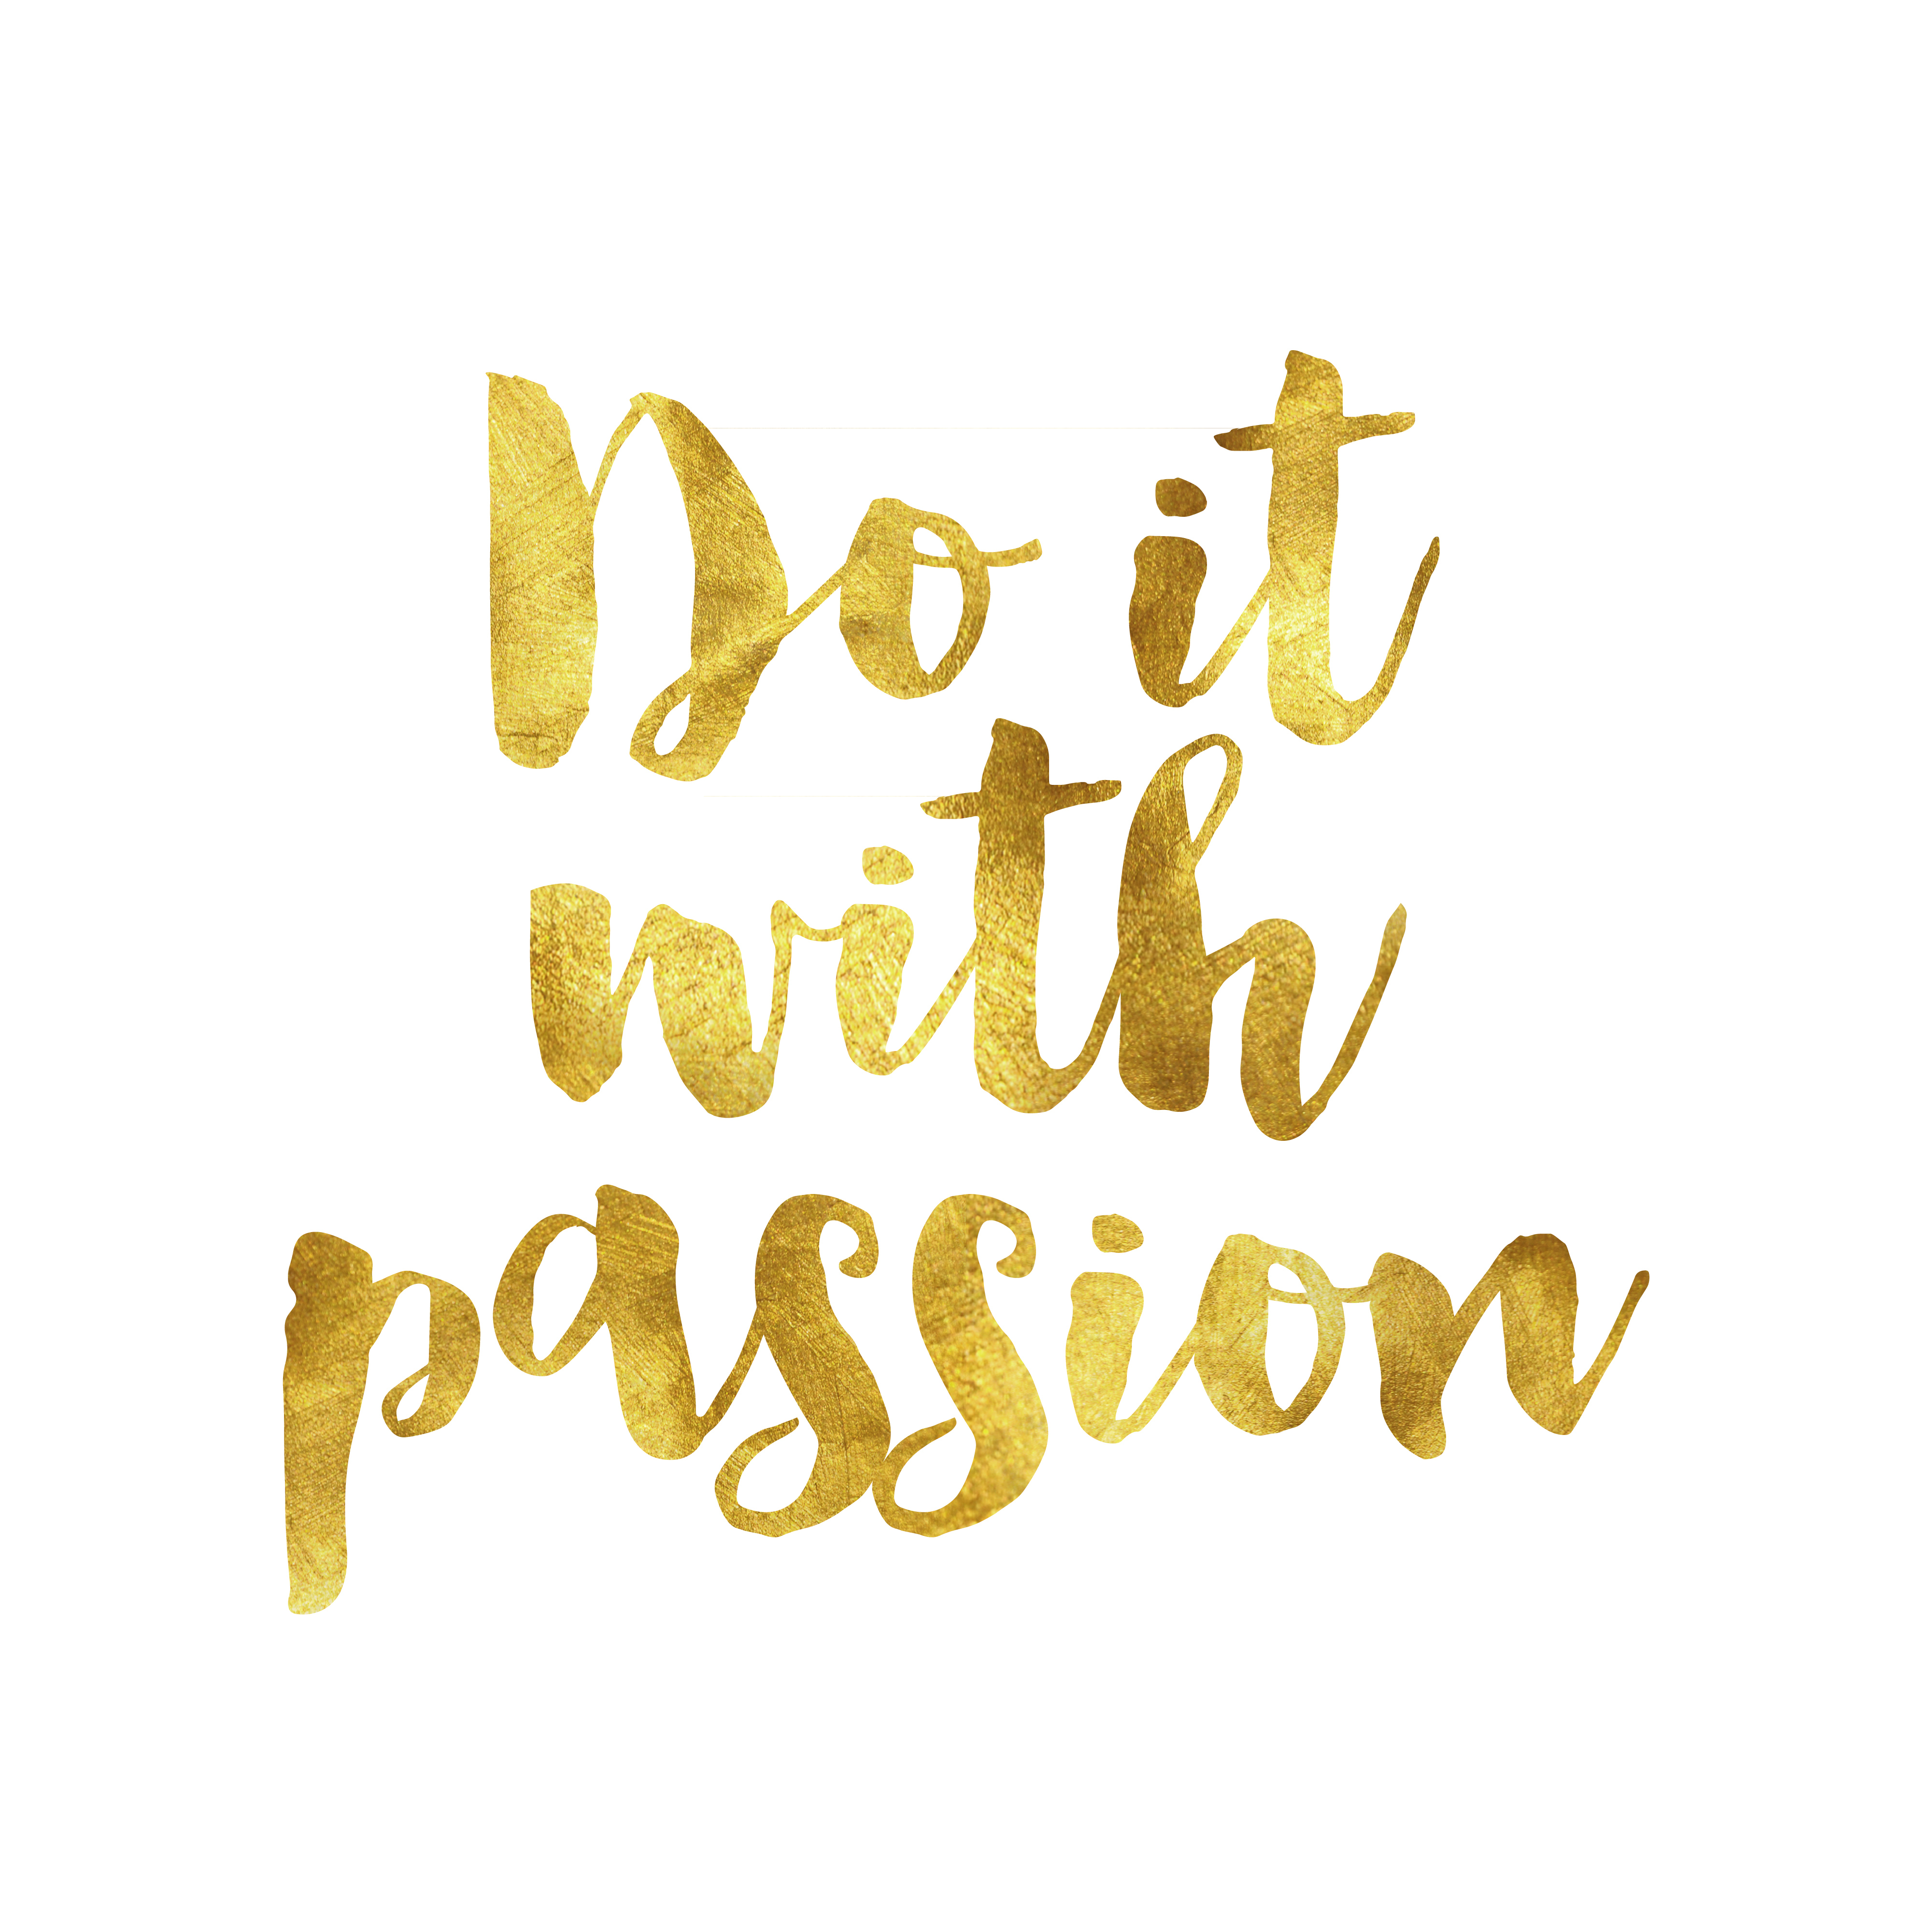 Do it with passion